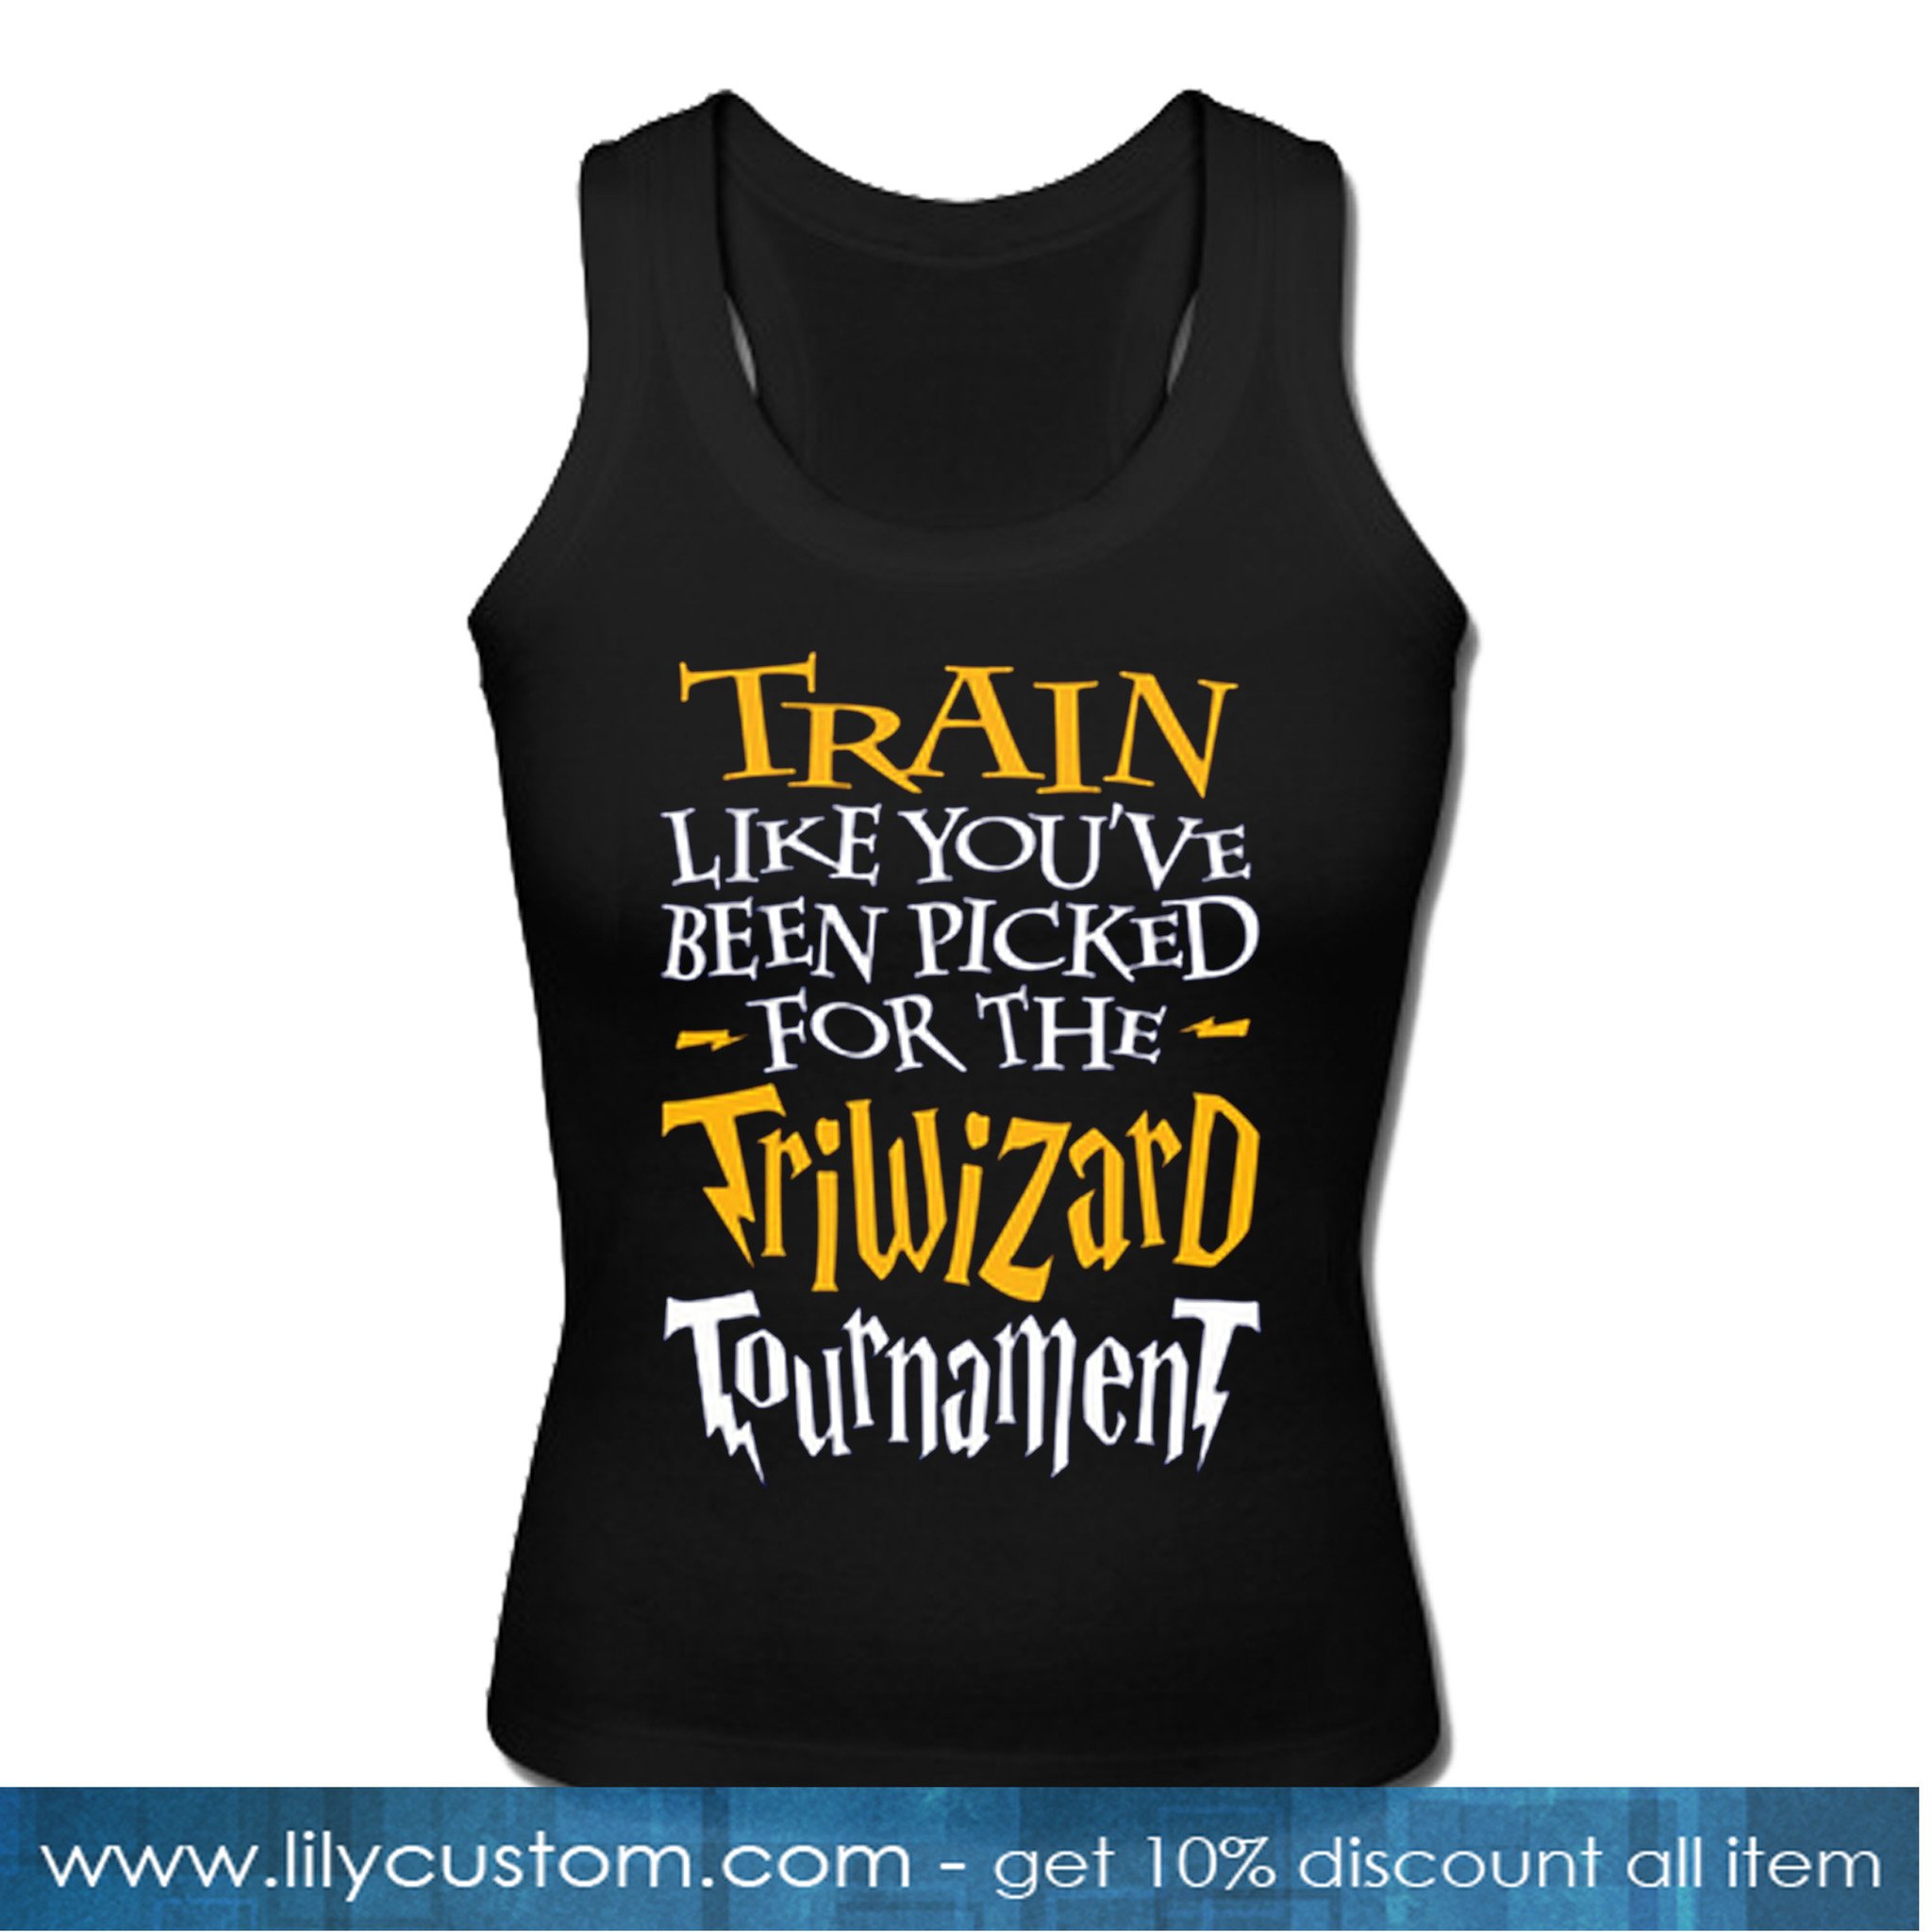 Train Like You've Been Picked For The tournament tanktop